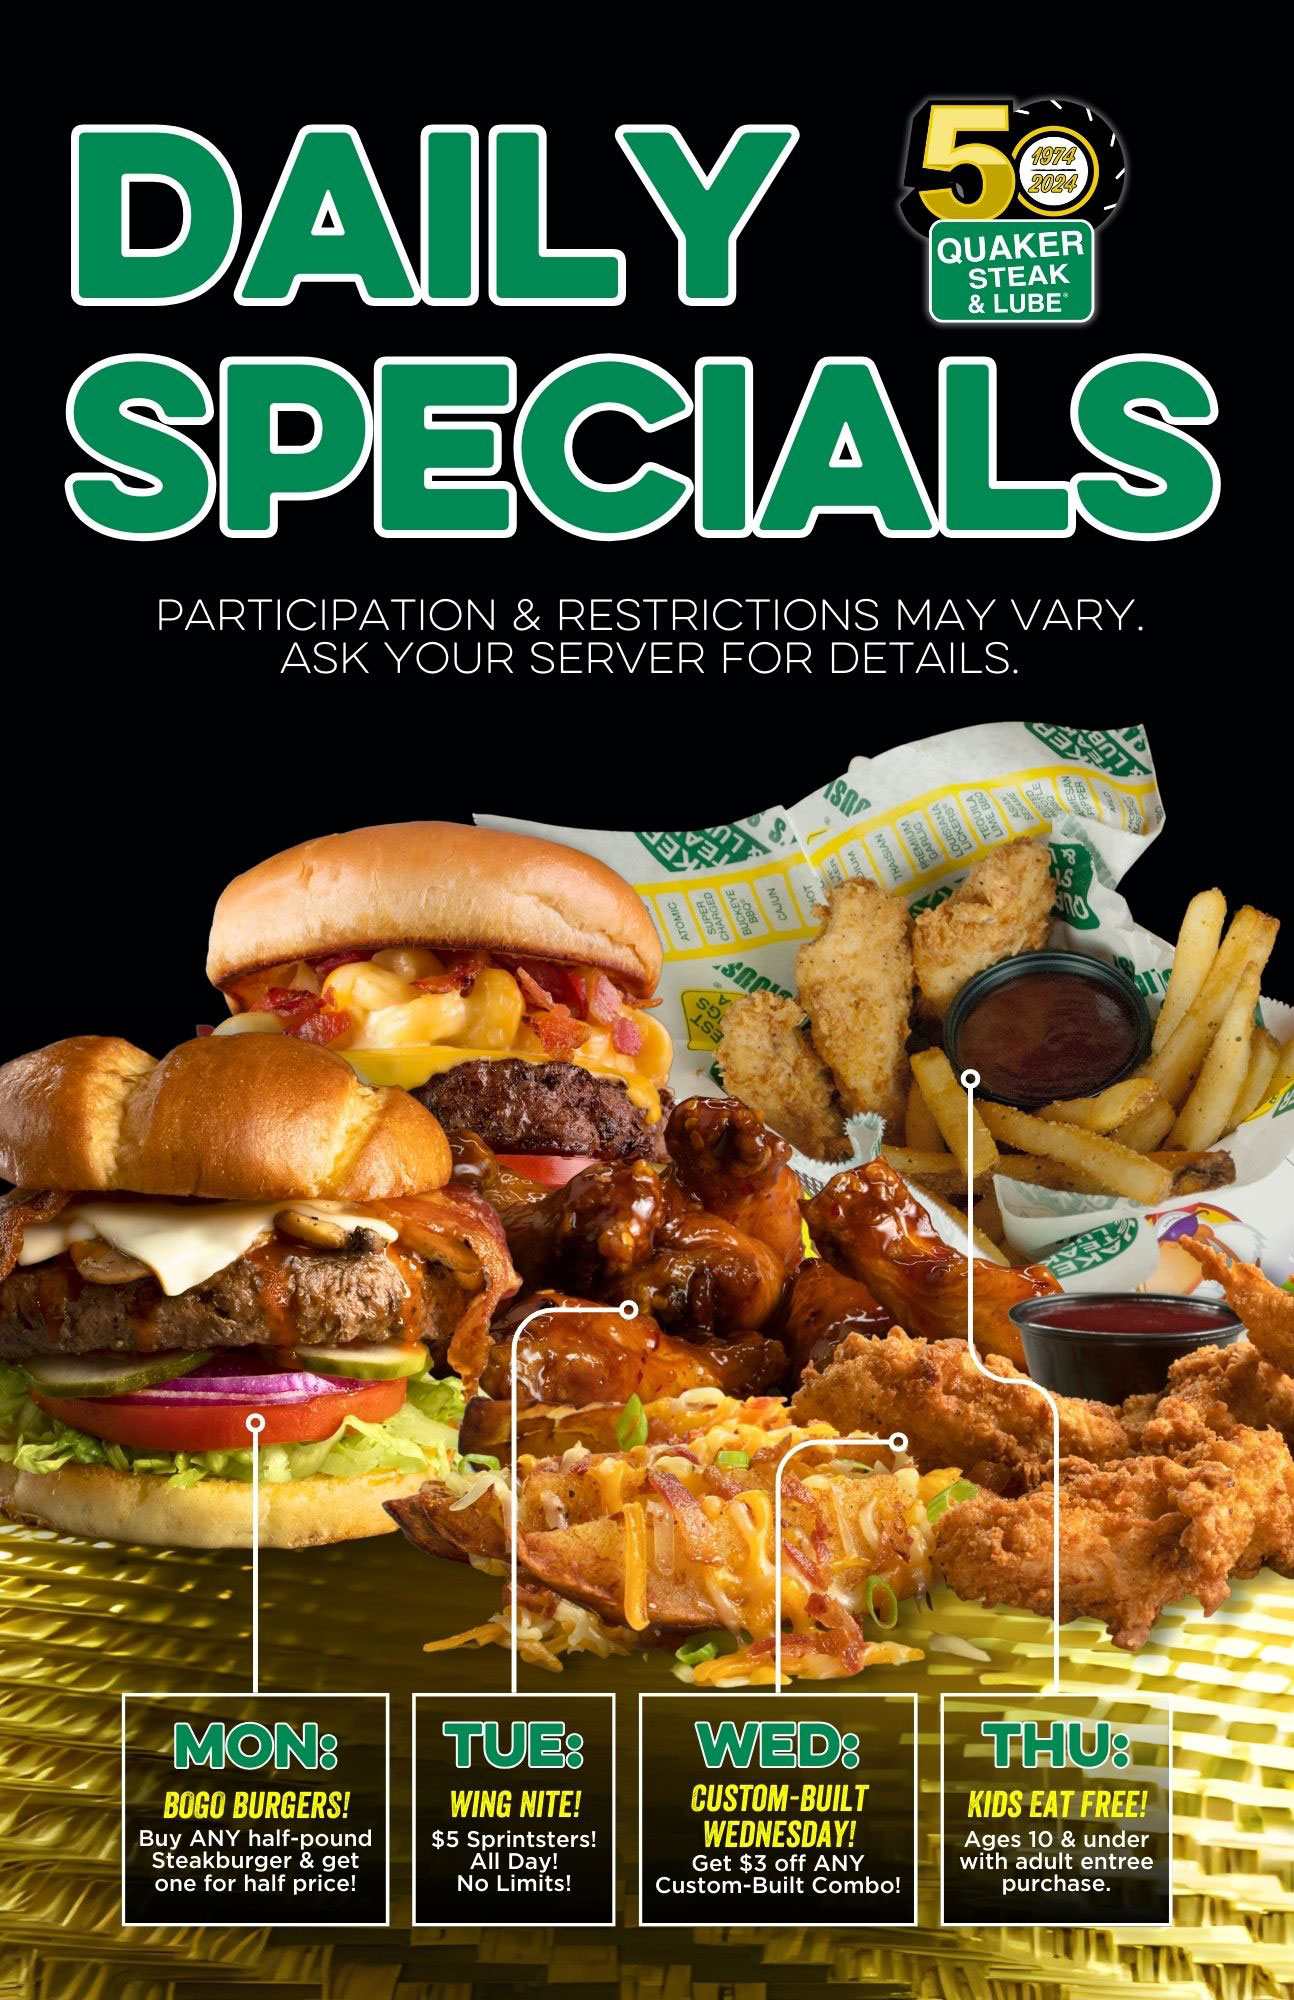 Daily Specials At the Quaker Steak & Lube Greenville Restaurant